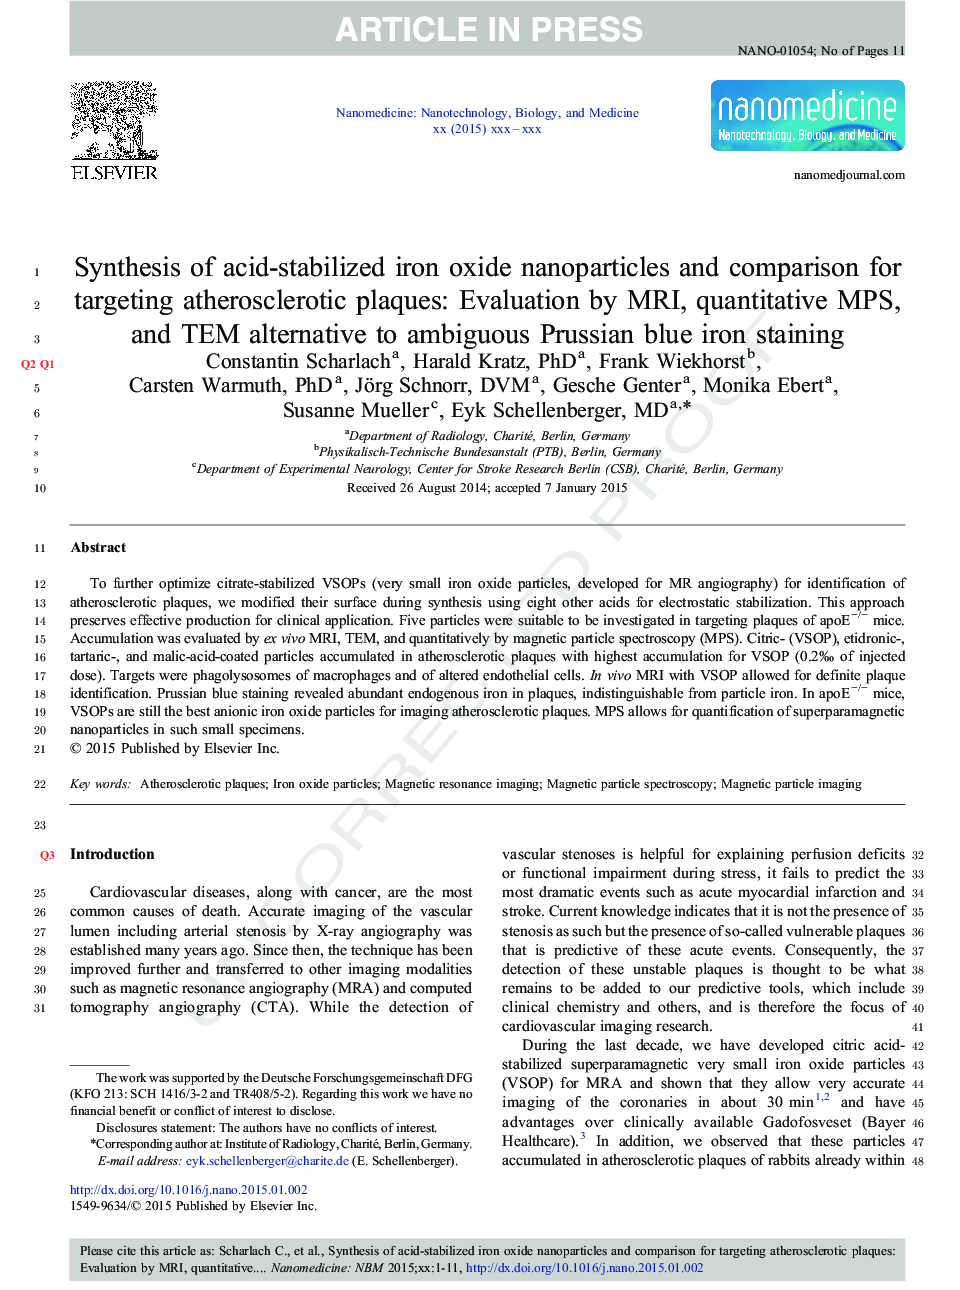 Synthesis of acid-stabilized iron oxide nanoparticles and comparison for targeting atherosclerotic plaques: Evaluation by MRI, quantitative MPS, and TEM alternative to ambiguous Prussian blue iron staining